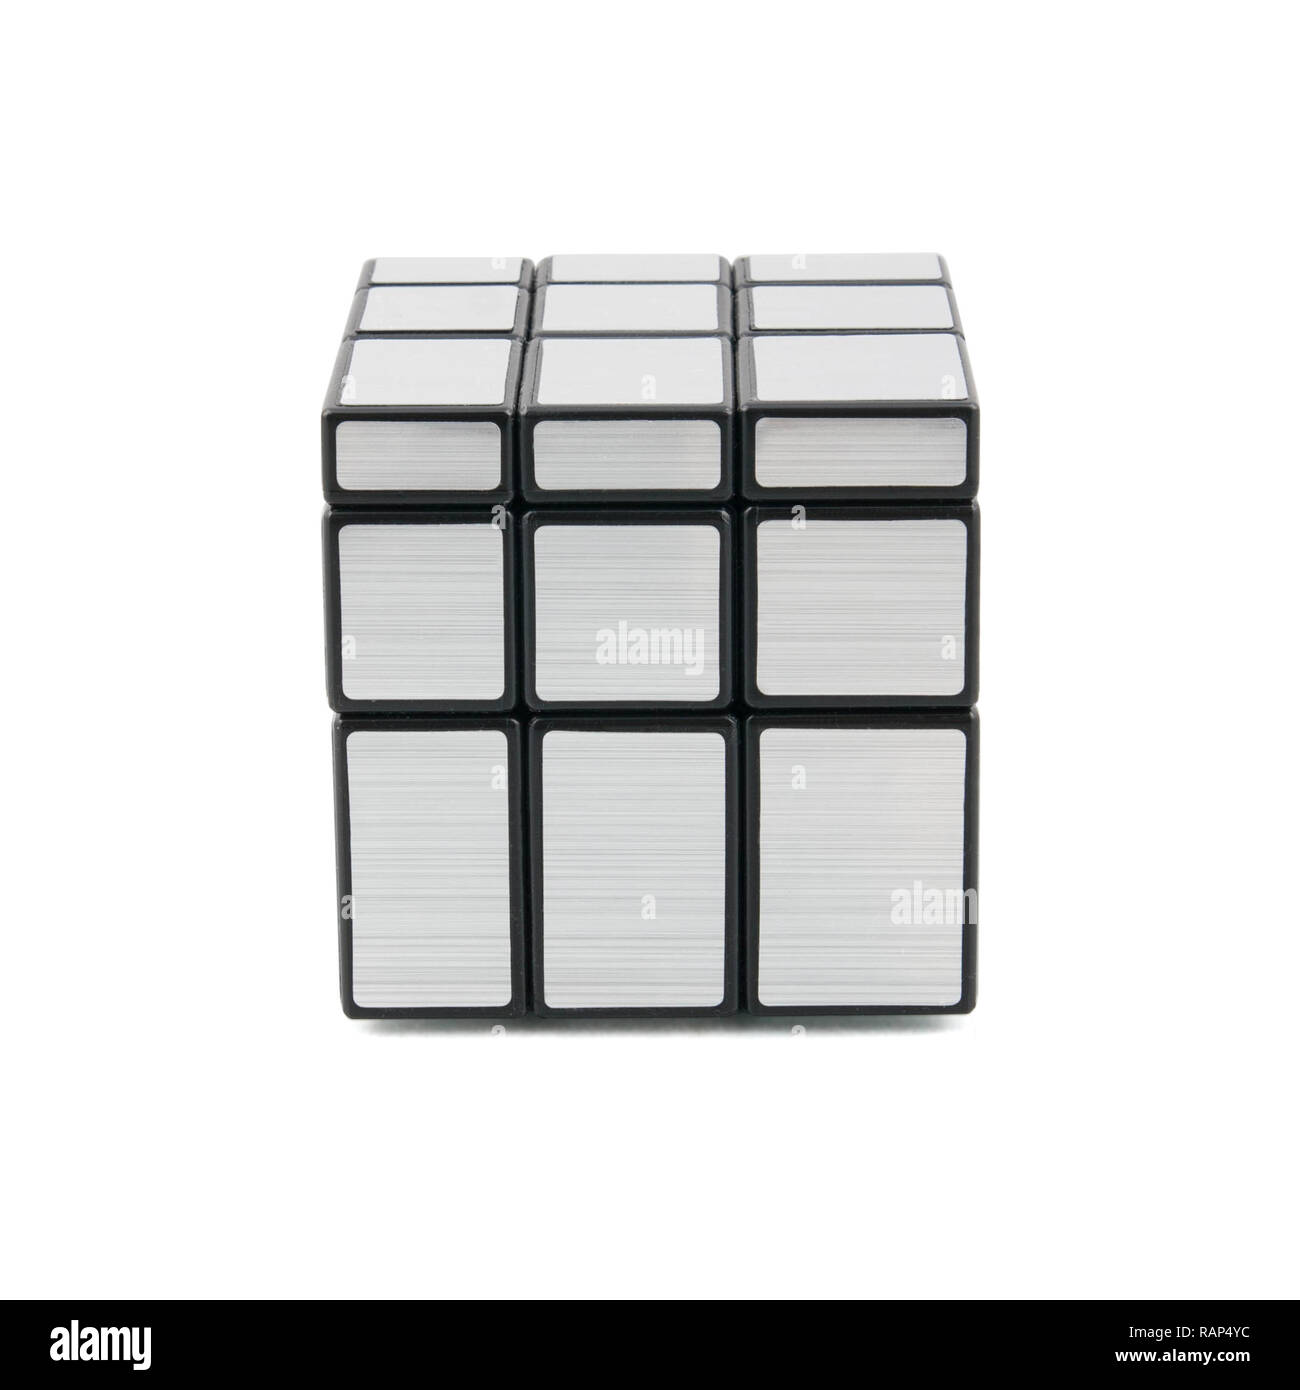 Rubik's mirror blocks on white background, also known as shape shifter Stock Photo